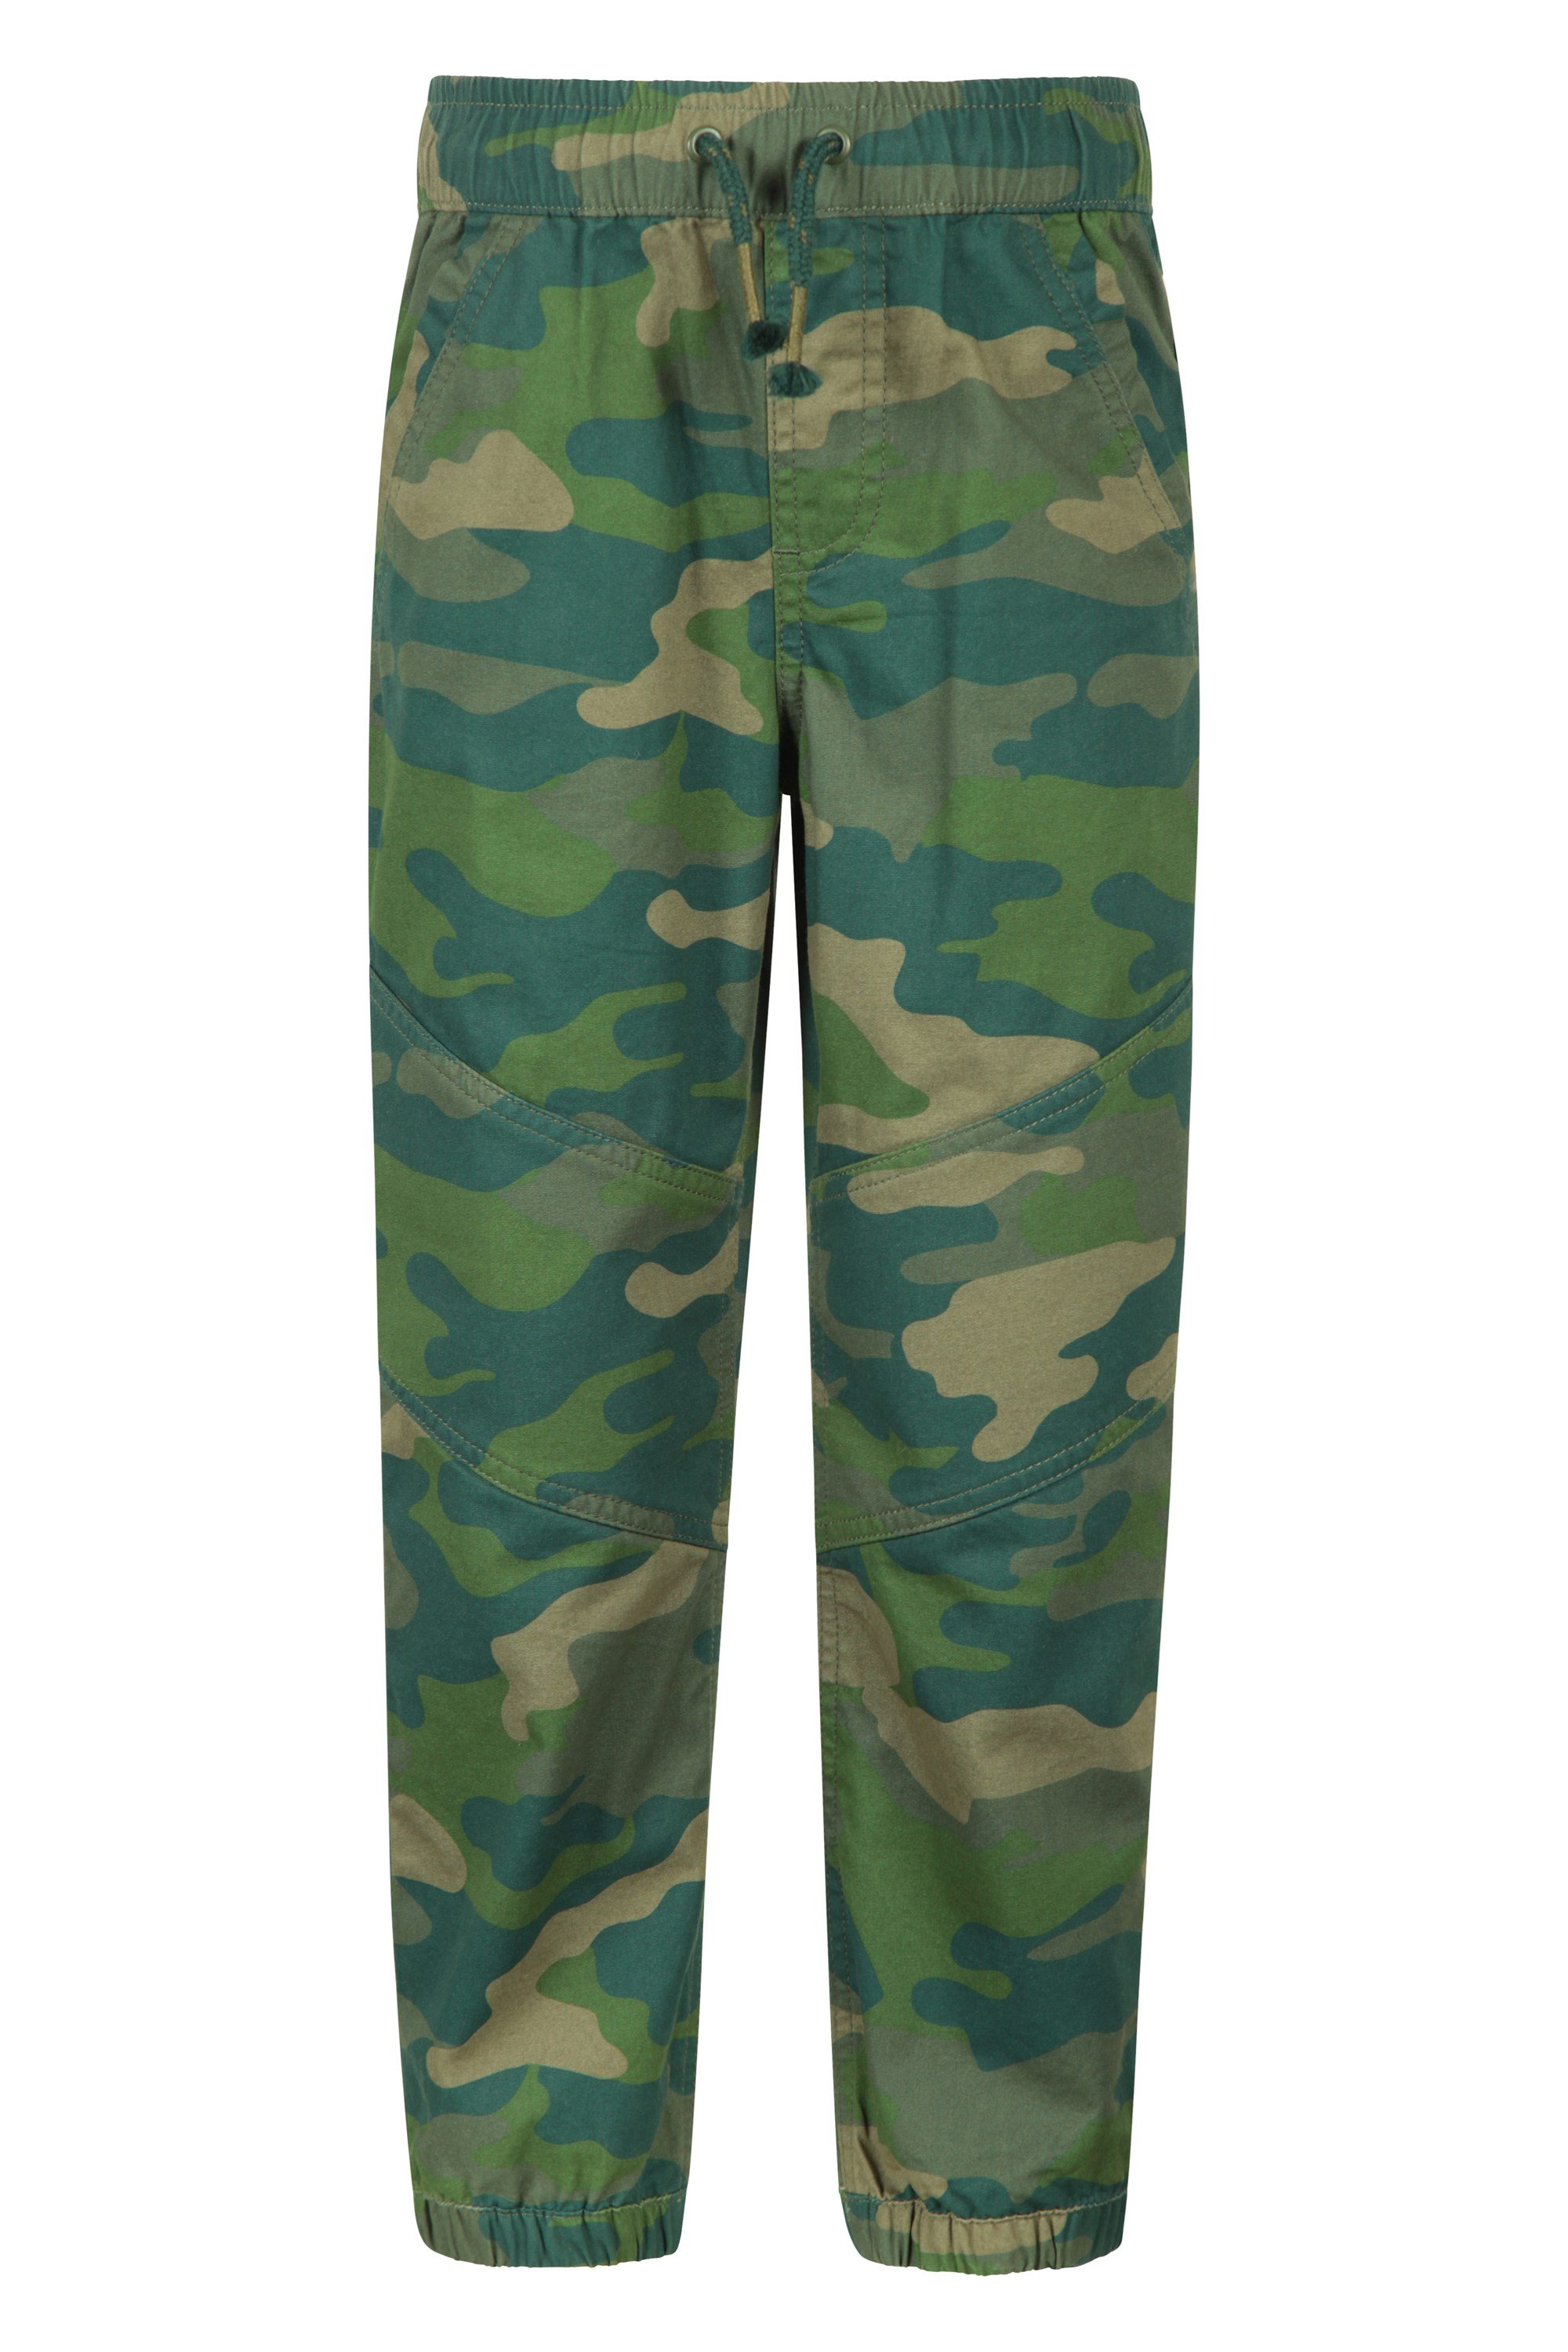 Camo Kids Trousers with Reinforced Knees - Green